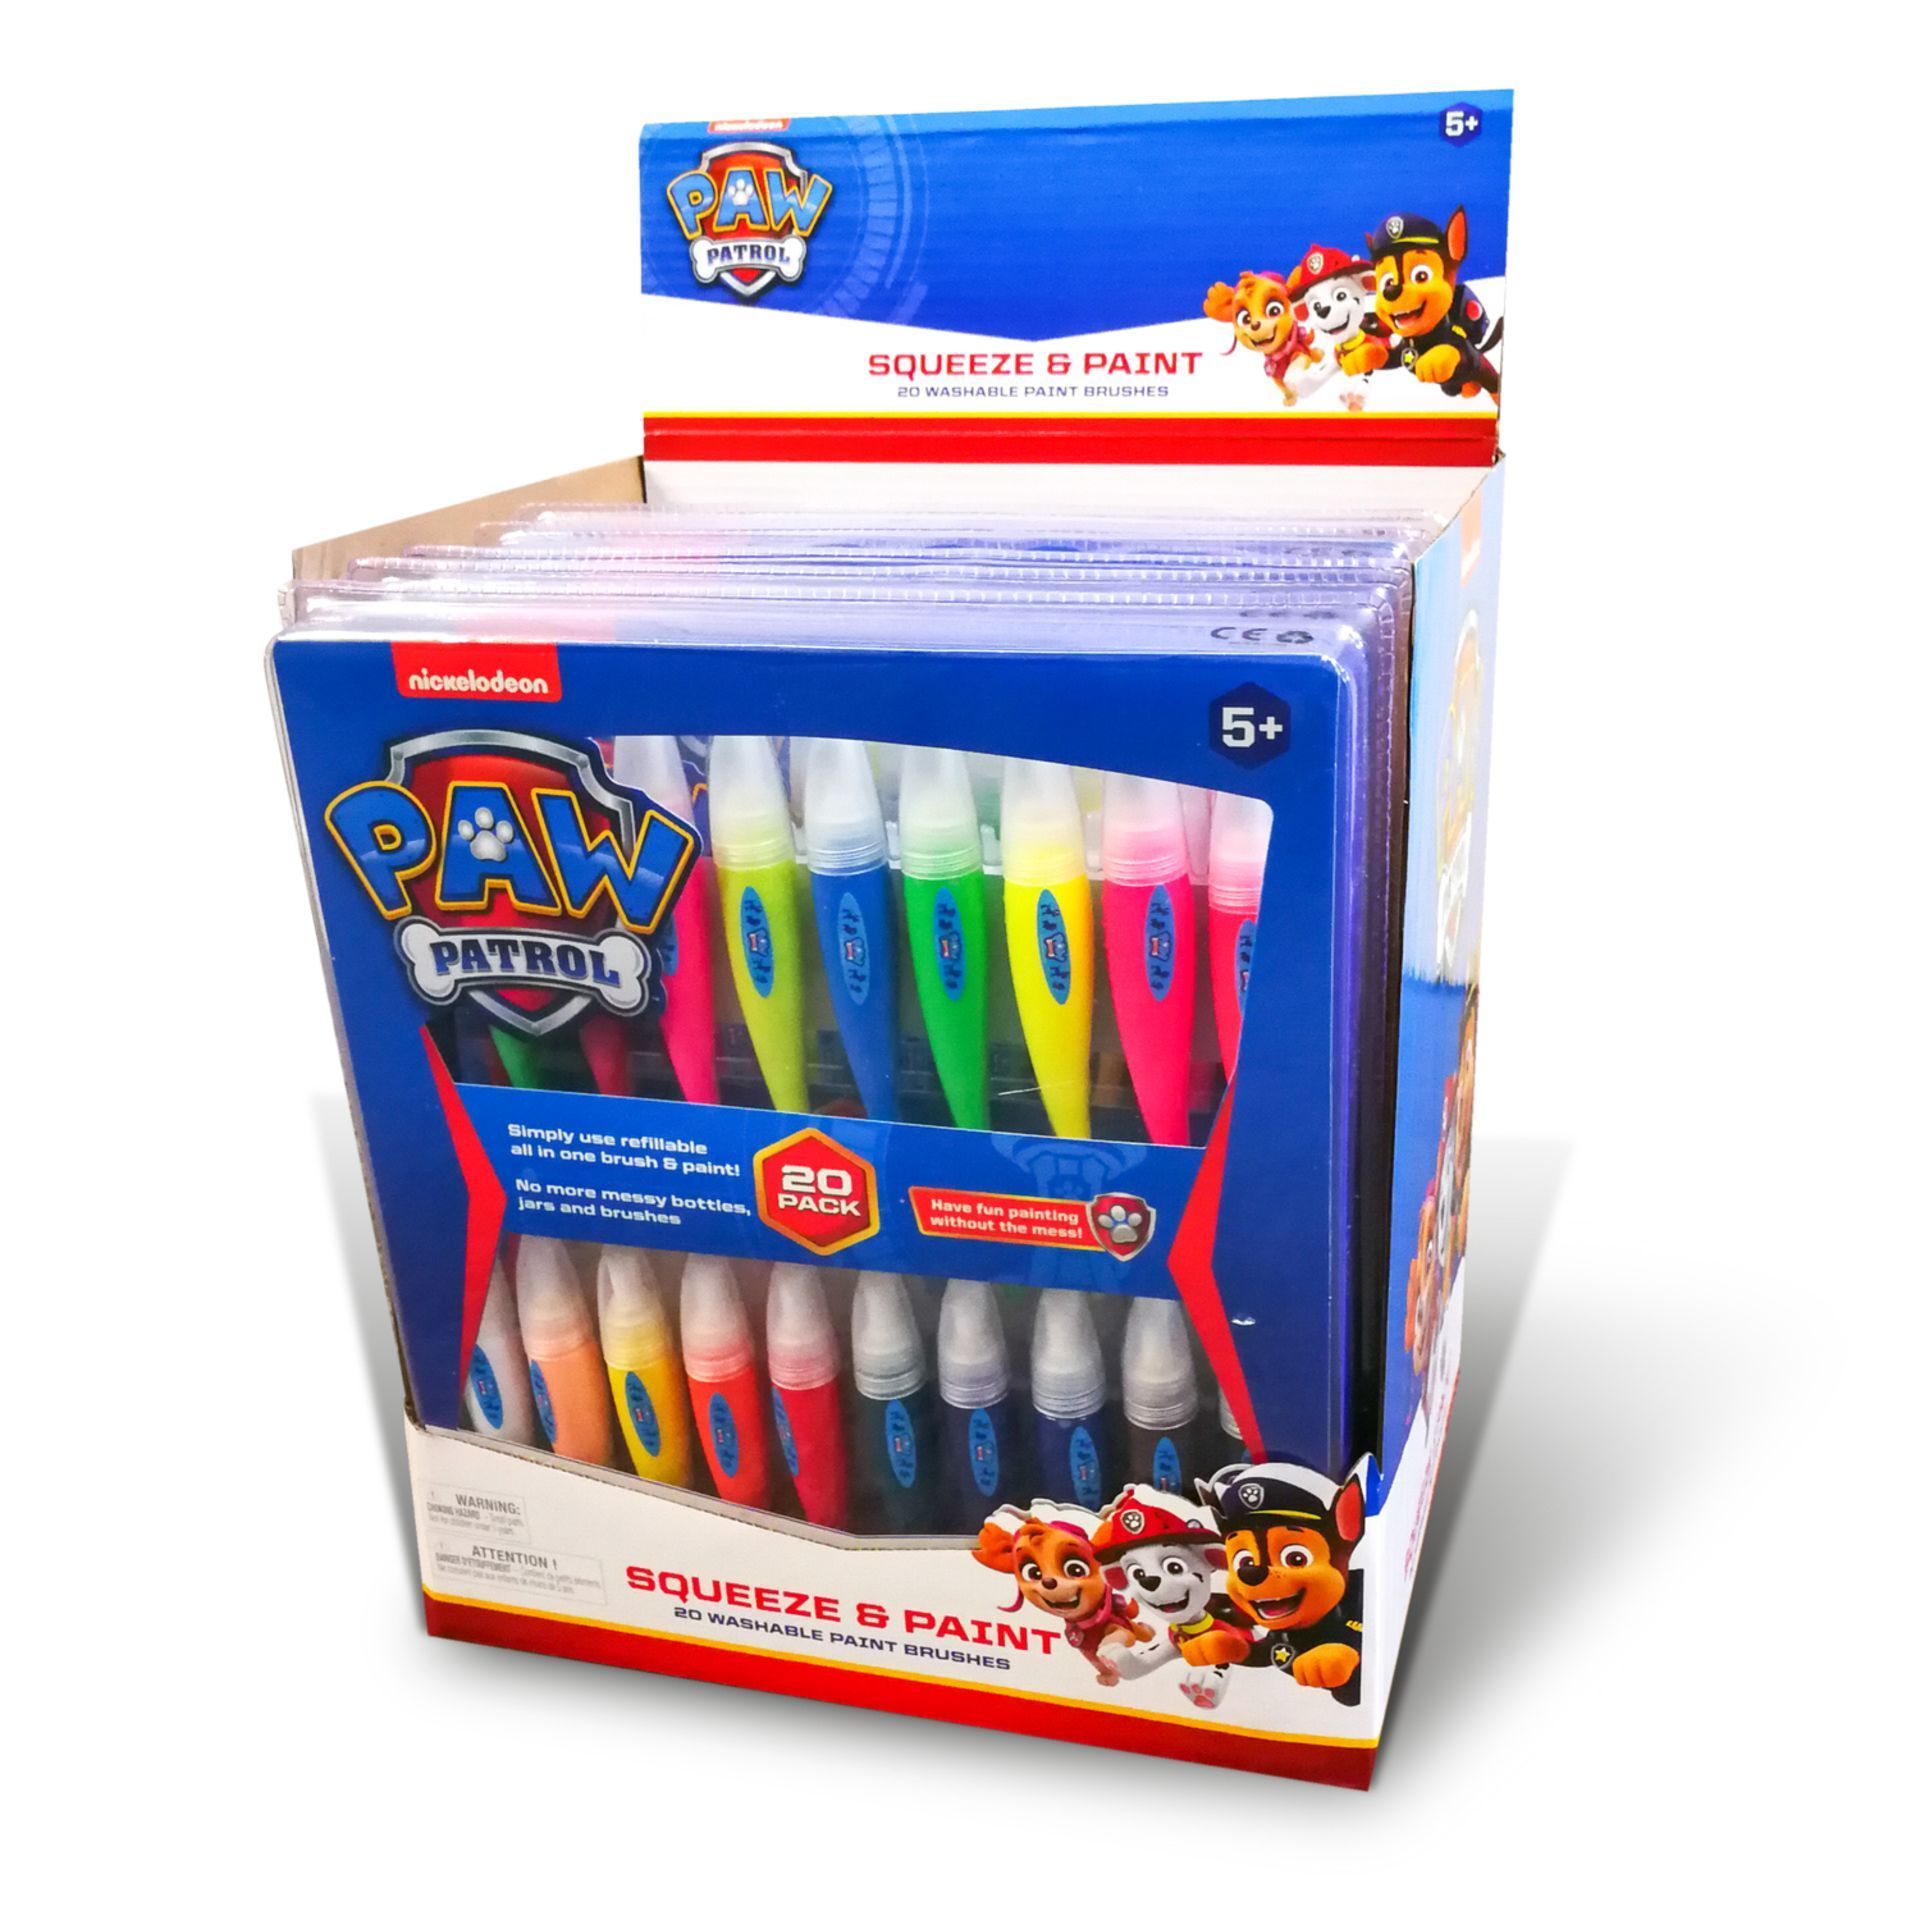 12 X PACKS OF 20 NICKELODEON PAW PATROL SQUEEZE & PAINT WASHABLE PAINT BRUSH SETS (ROW5)